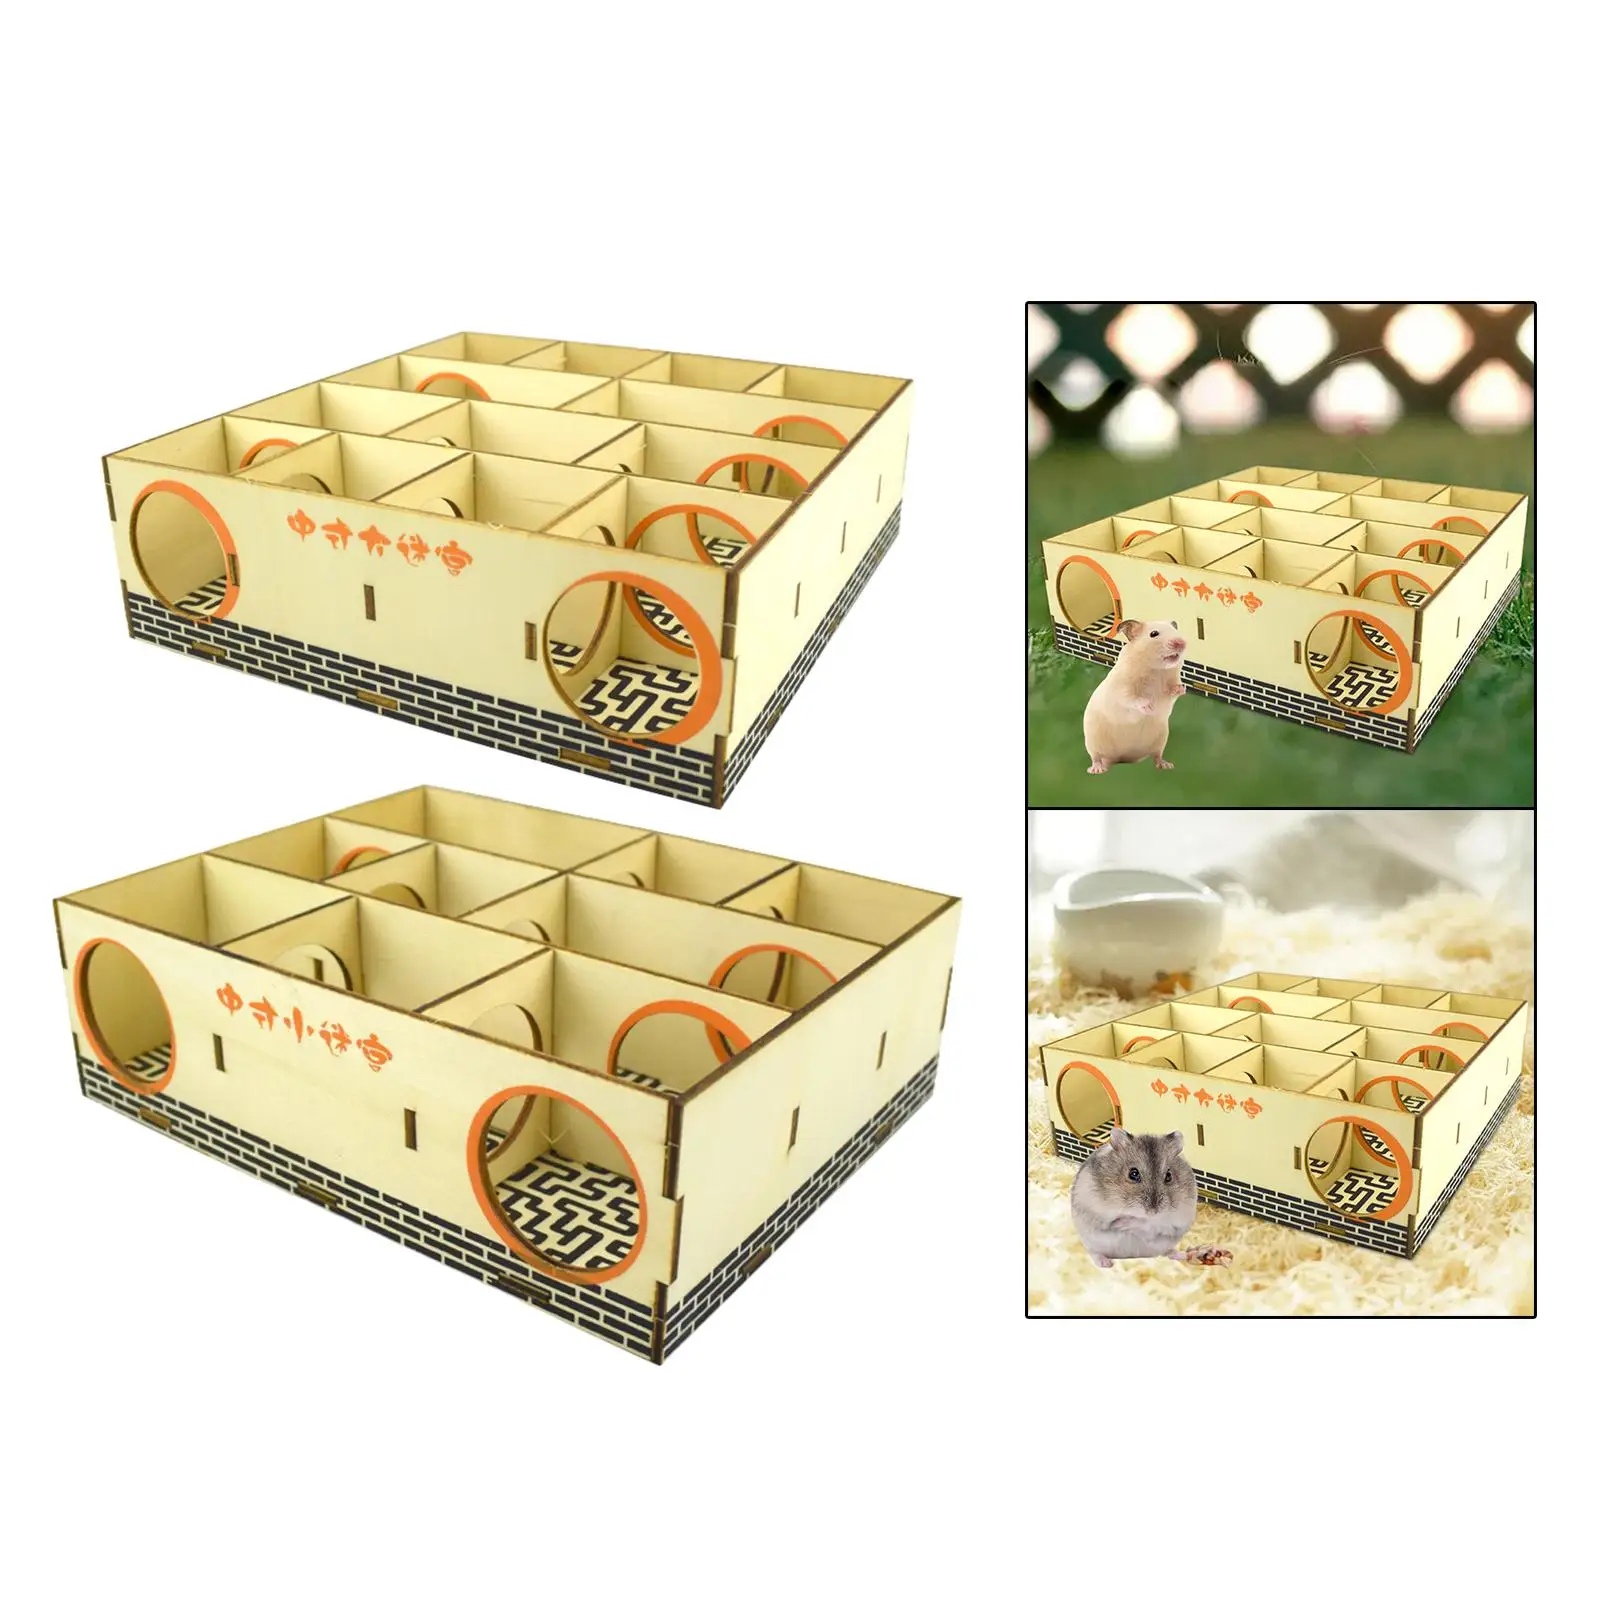 Hamster Maze Playhouse Small Animals Puzzle Toy Mice Wooden Hamster House